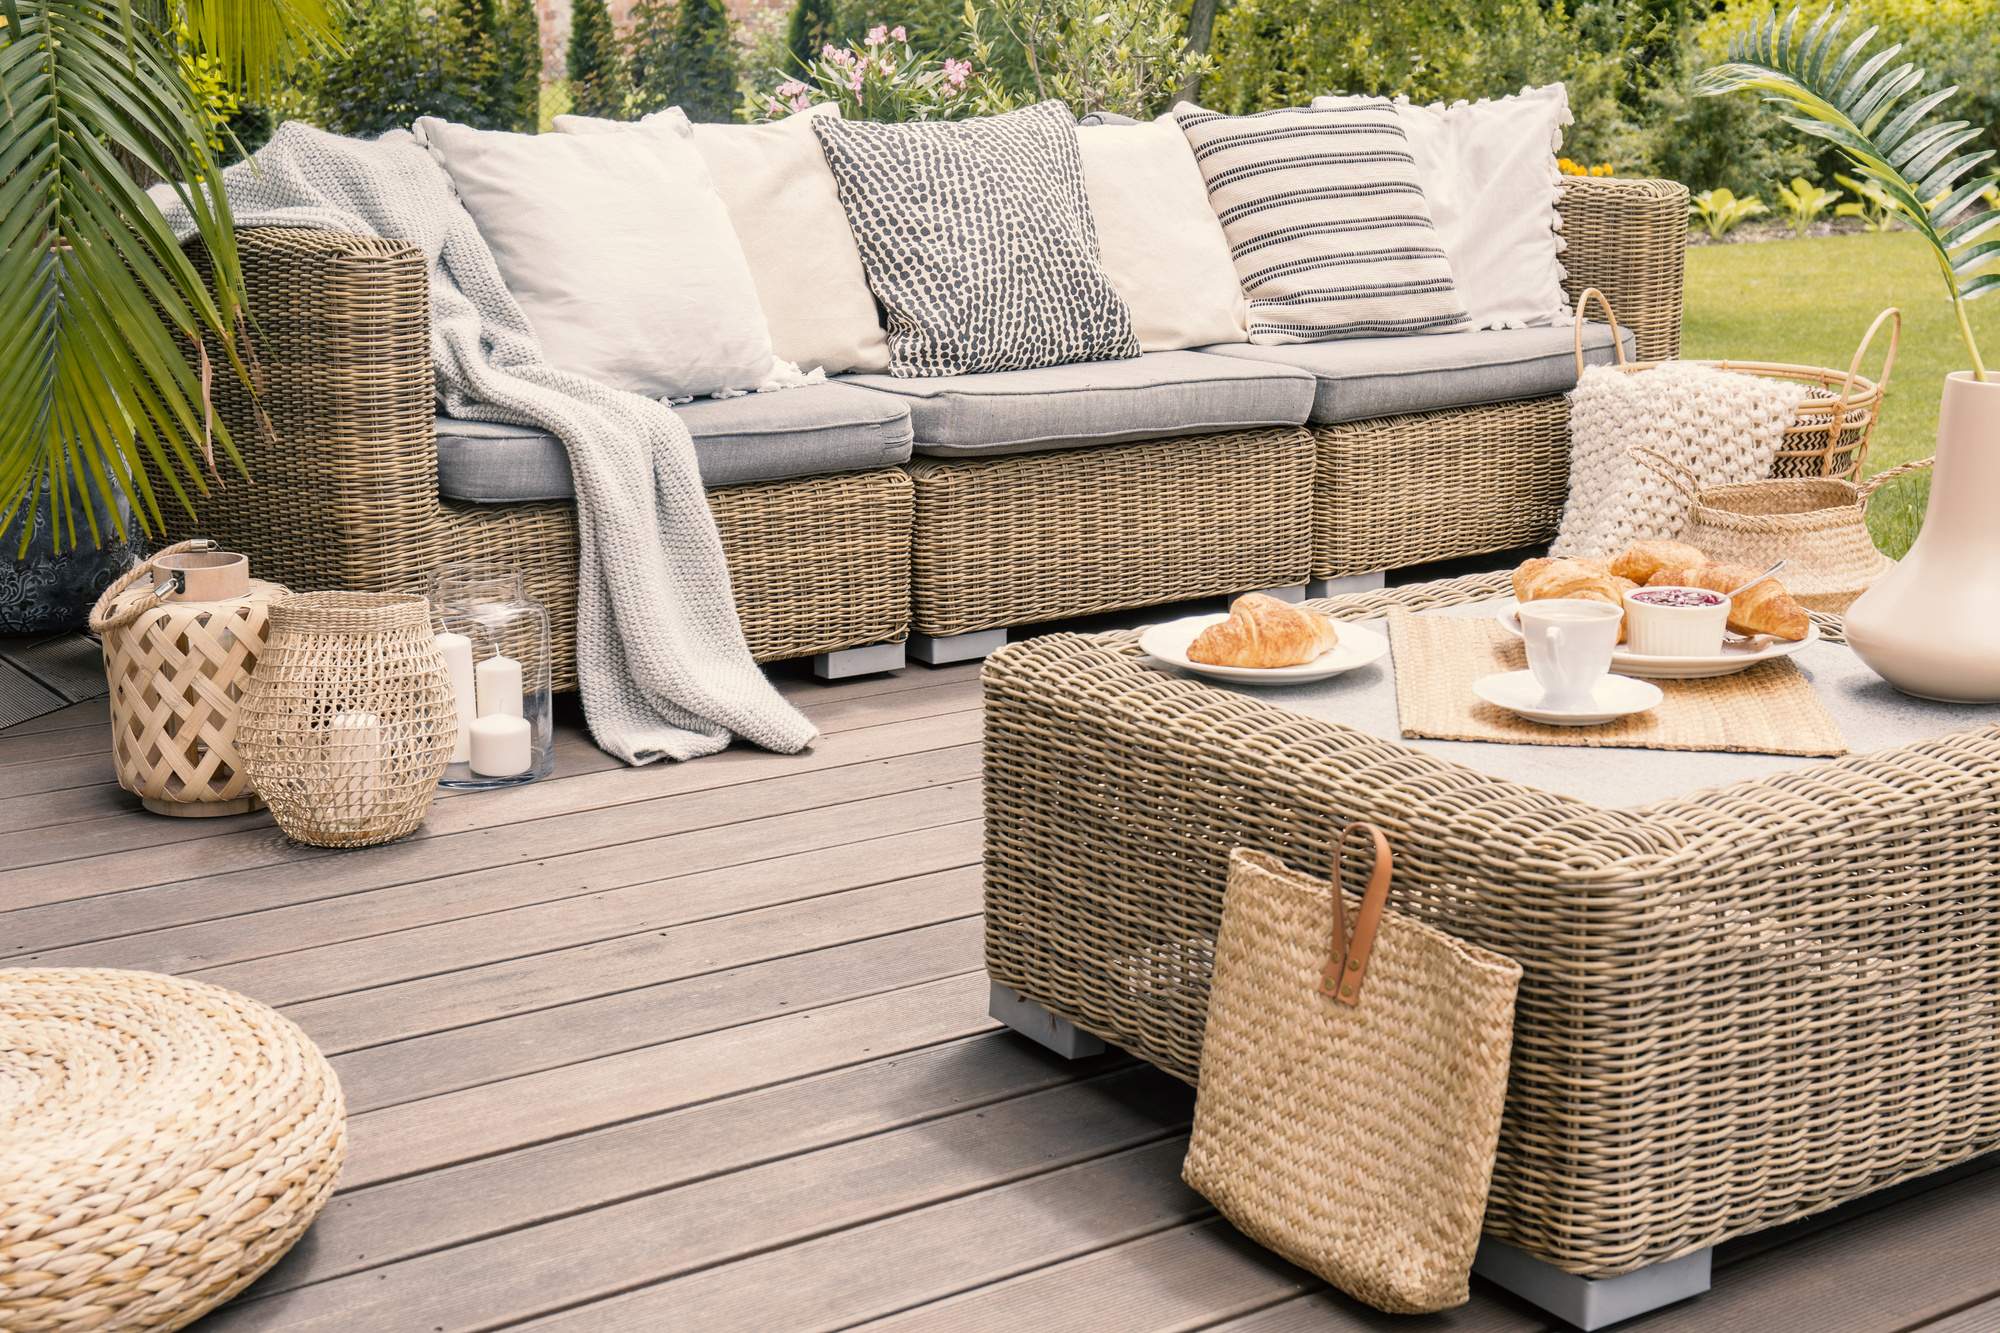 How to Decorate Your Patio Space